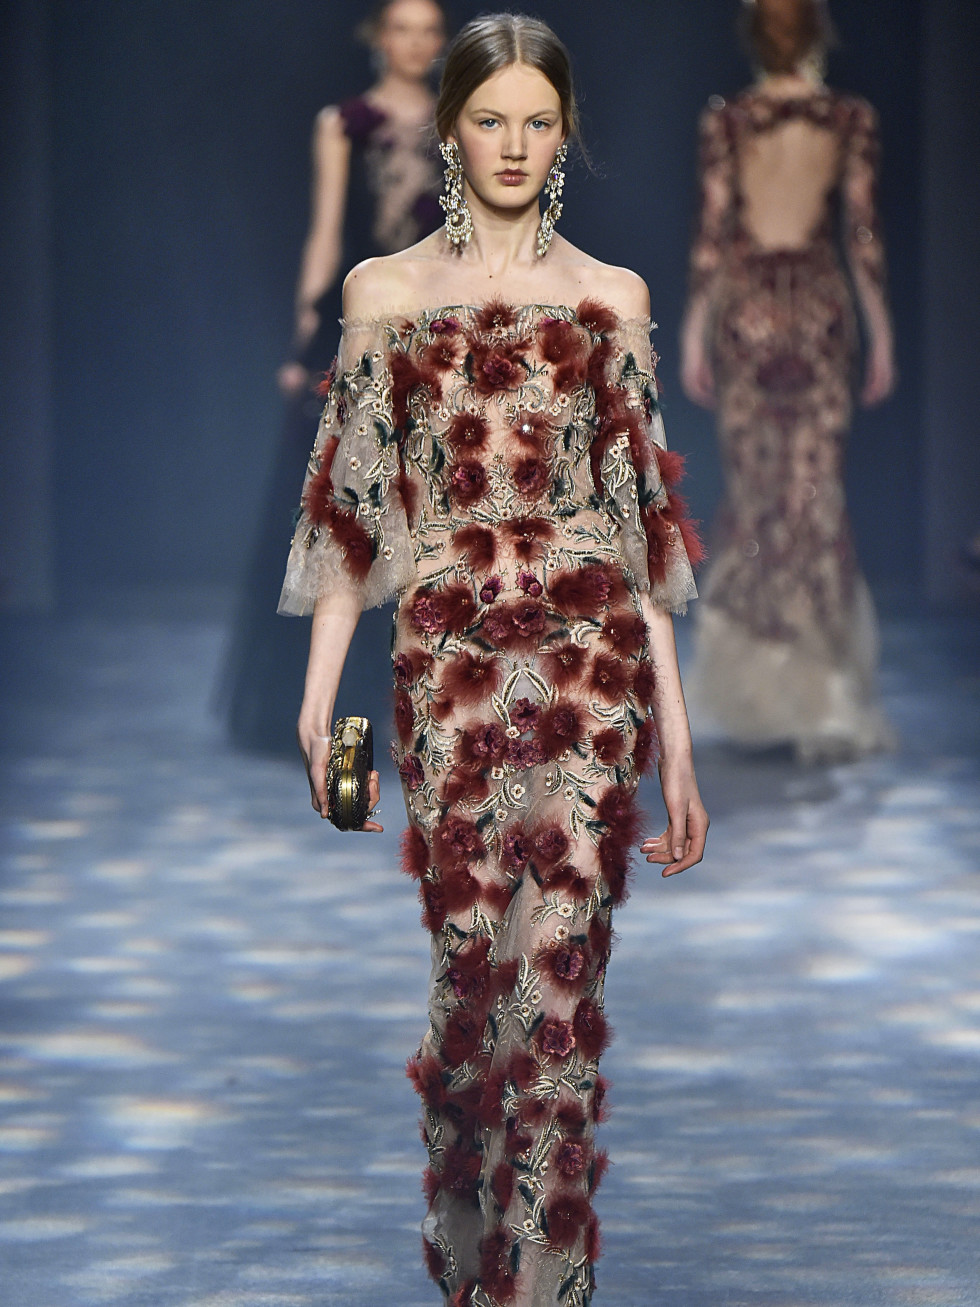 Marchesa collection features magnificent evening gowns fit for a queen ...